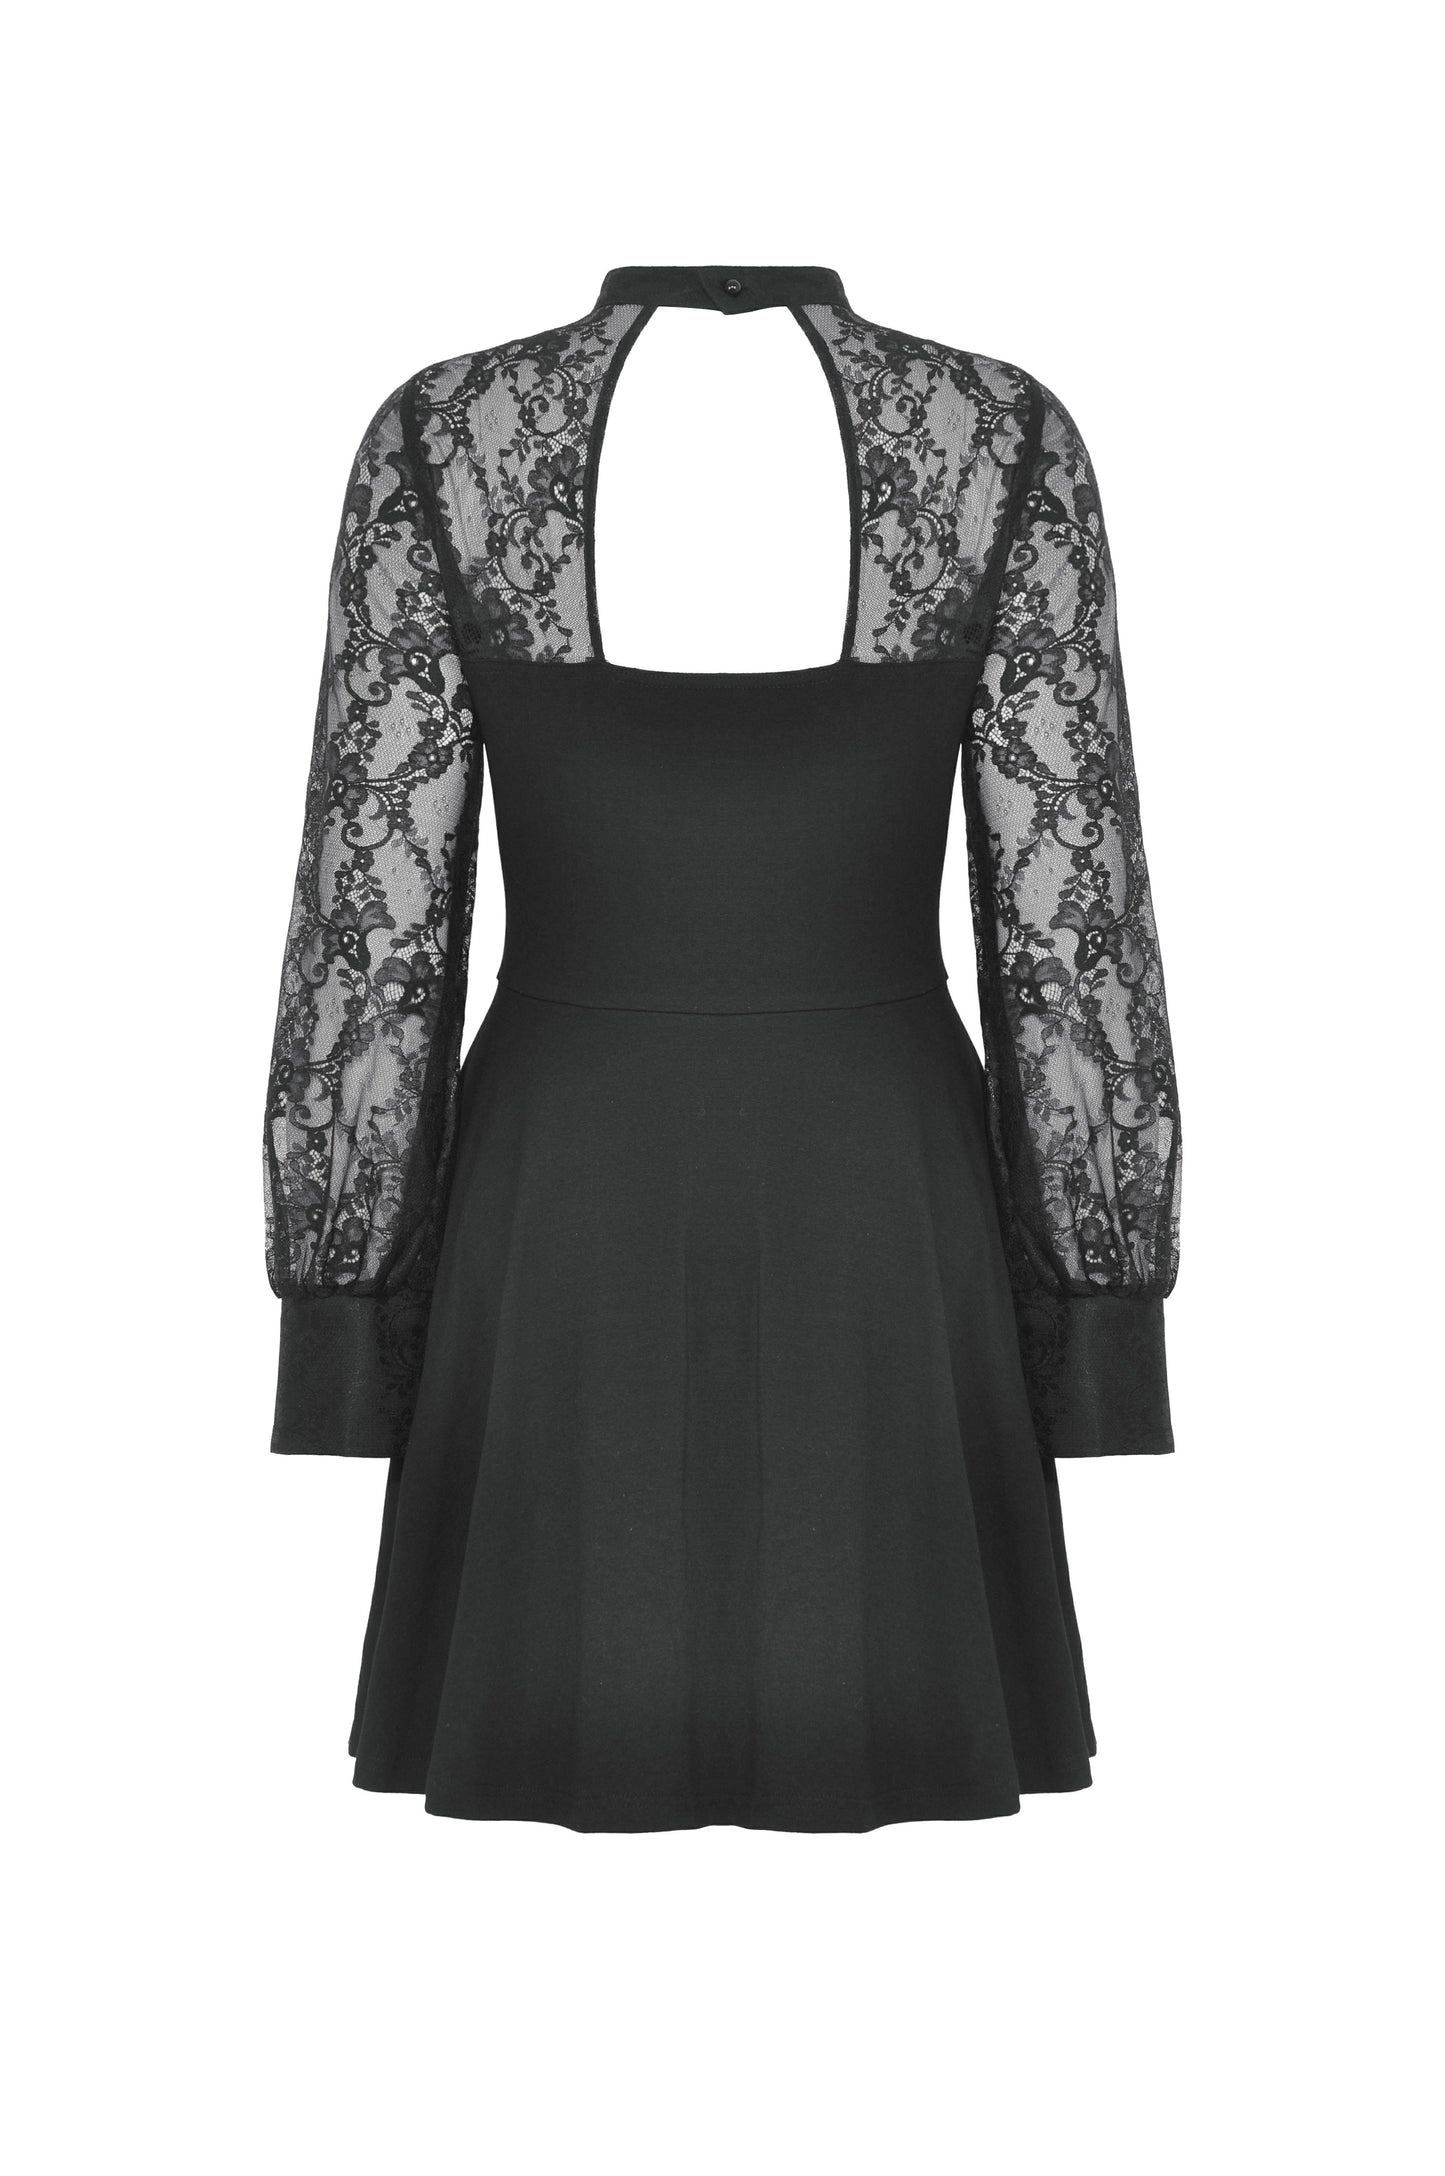 No Reflection Gothic Floral Lace Sleeve Dress by Dark In Love